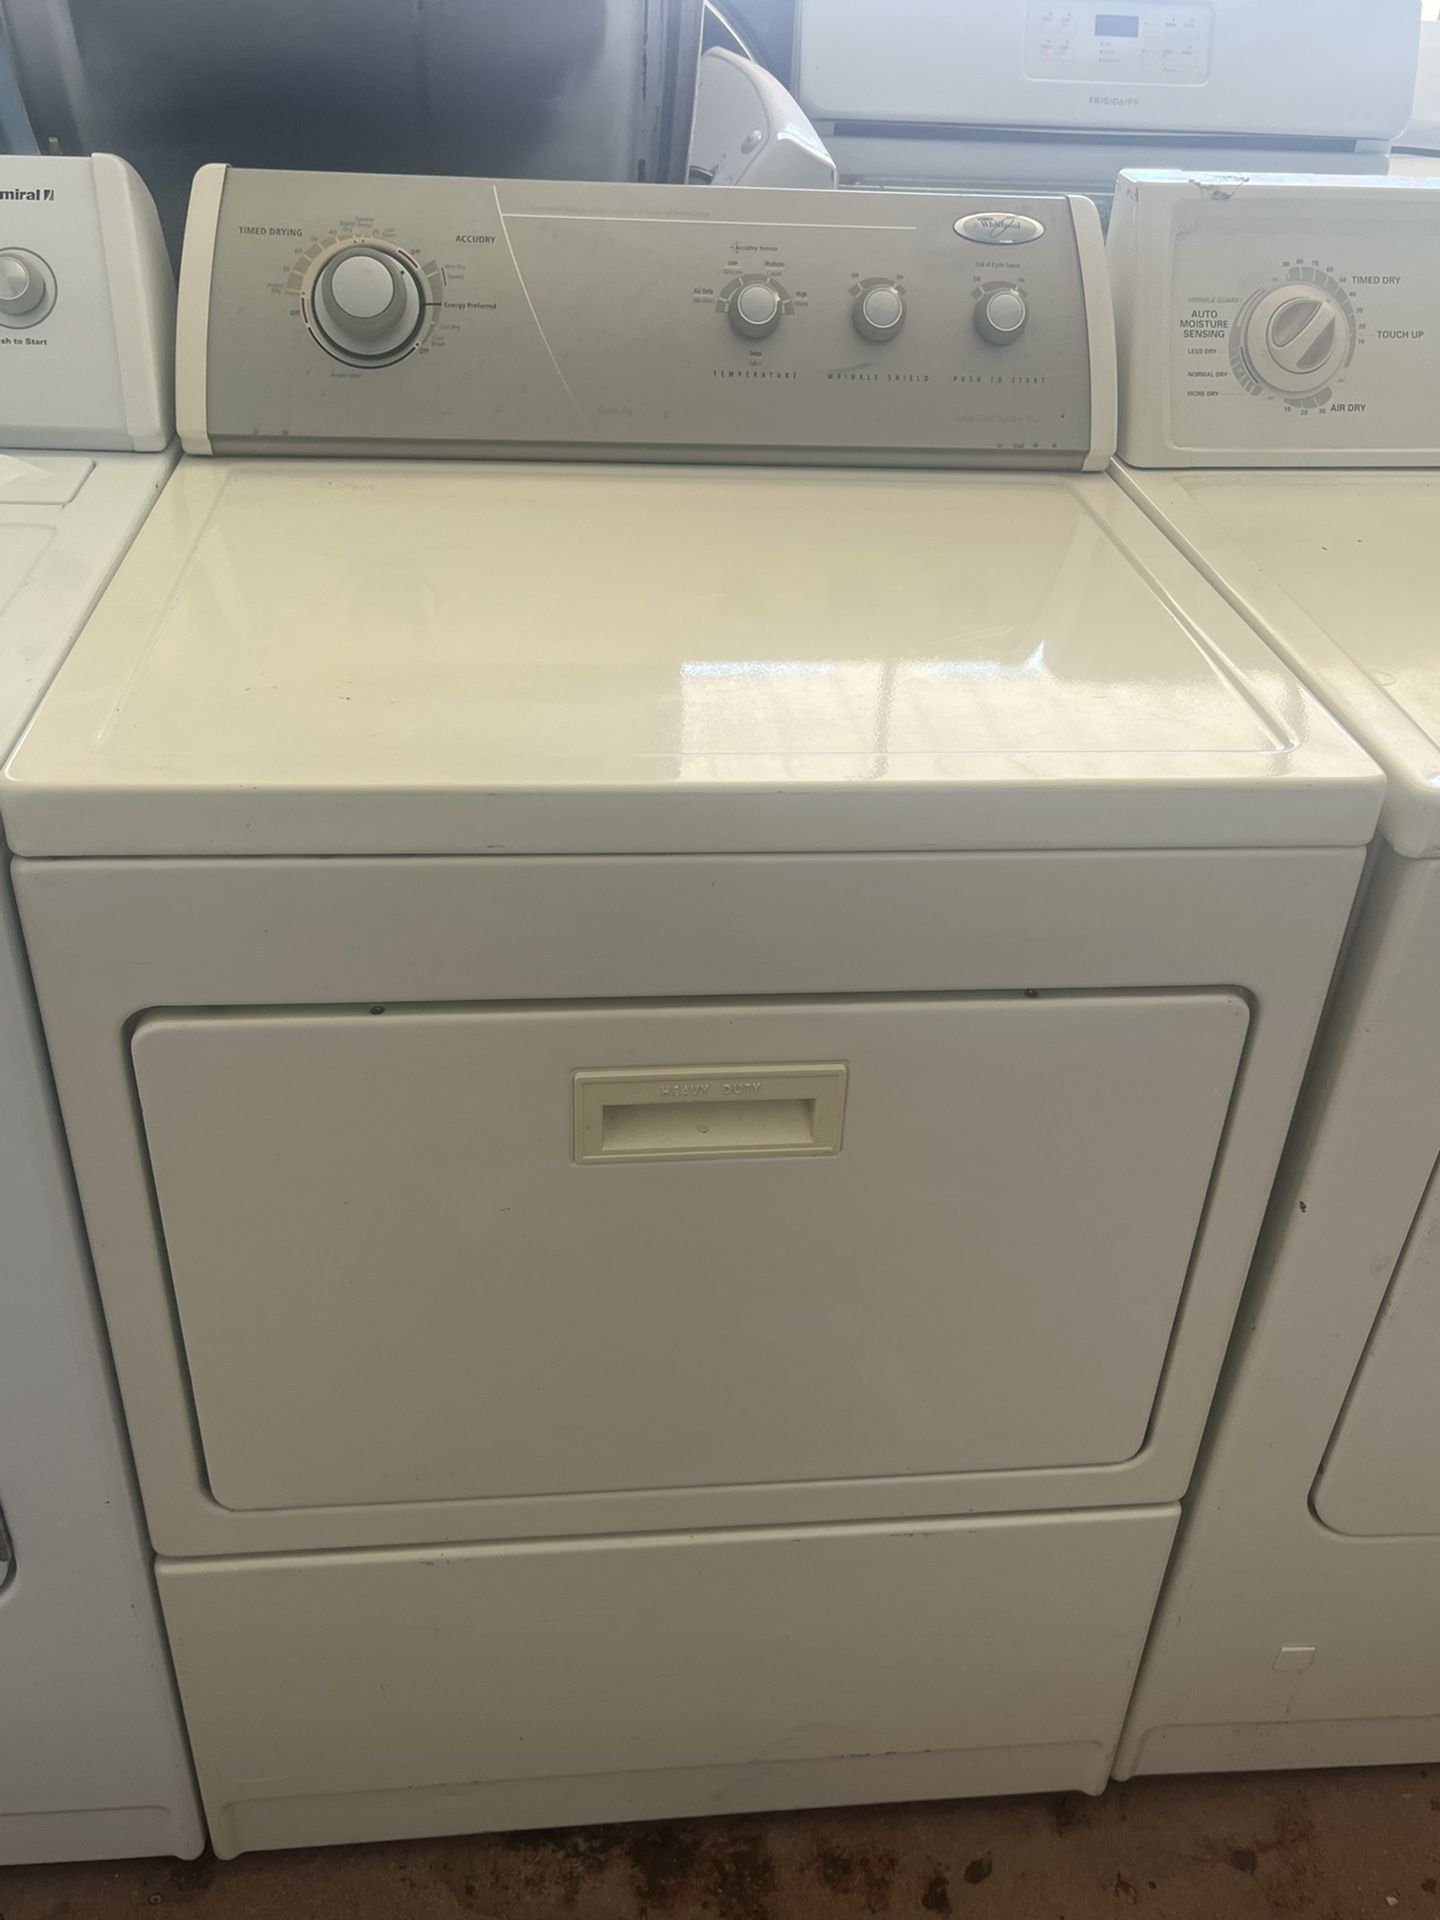 Whirlpool Electric Dryer Beige Color 